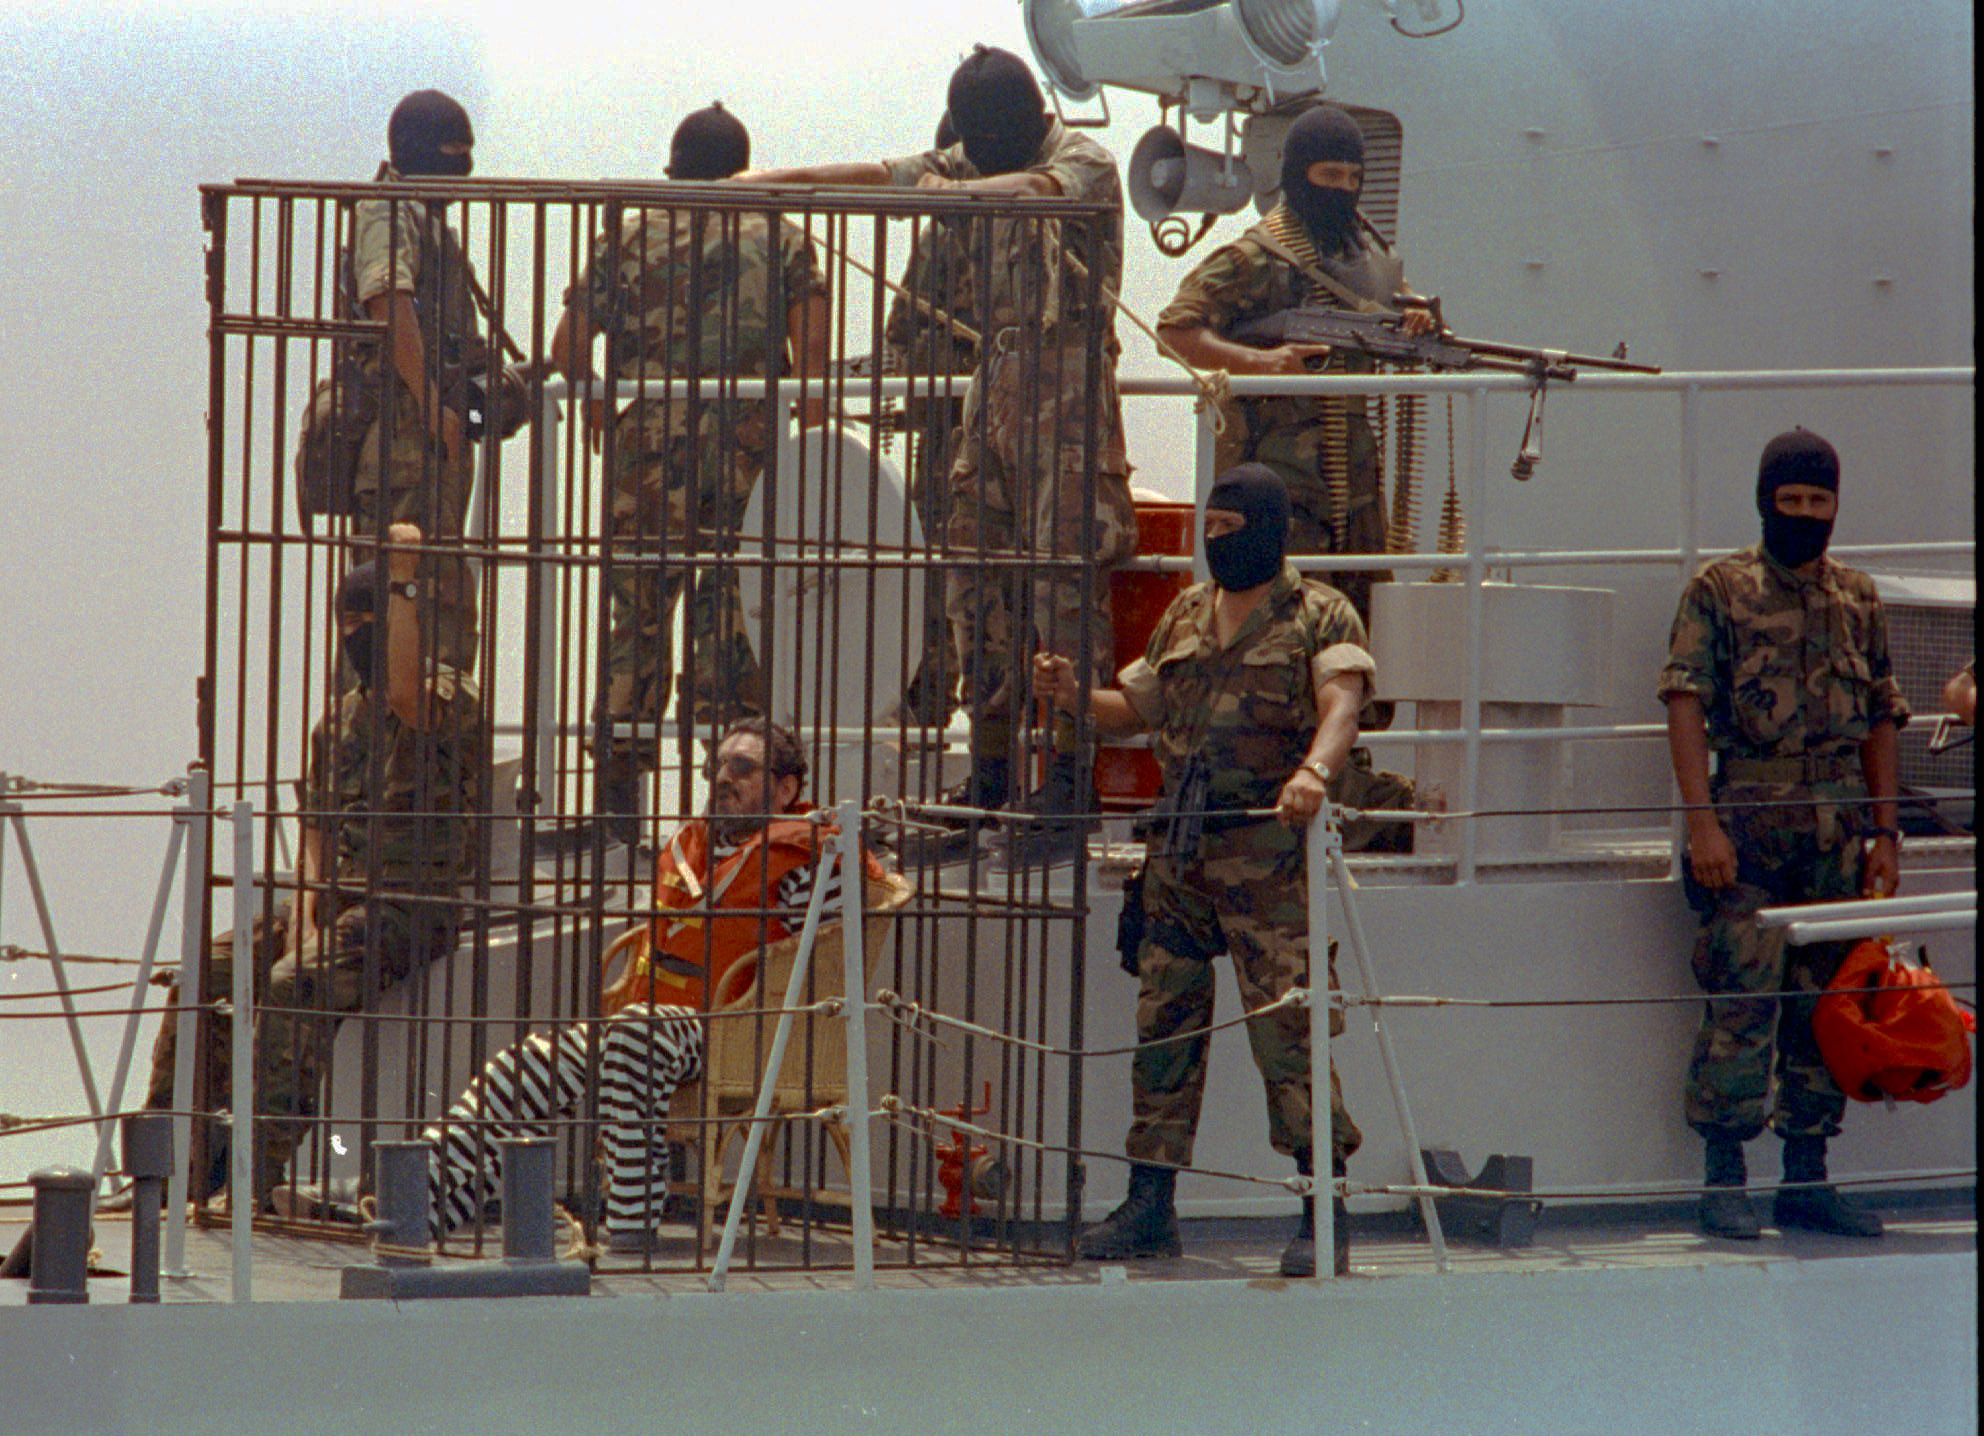 Shining Path leader Abimael Guzman is seen being transfered in this April 3, 1993 photo, from confinement on a rocky island to a new maximum security prison in a Navy Base in Callao, Peru. Transfer was made an a Navy ship where Guzman was caged and under heavy security. The Shining Path was founded in 1970 by Guzman and took up arms a decade later, intent on imposing a regime along the ideals of China's Mao Tse-tung. Guzman instilled an almost religious zeal in his followers and convinced them that Sendero Luminoso, as the group is called in Spanish, would one day rule Peru and then carry the revolution even into the heart of hated capitalism: the United States.(AP Photo/Vera Lentz)